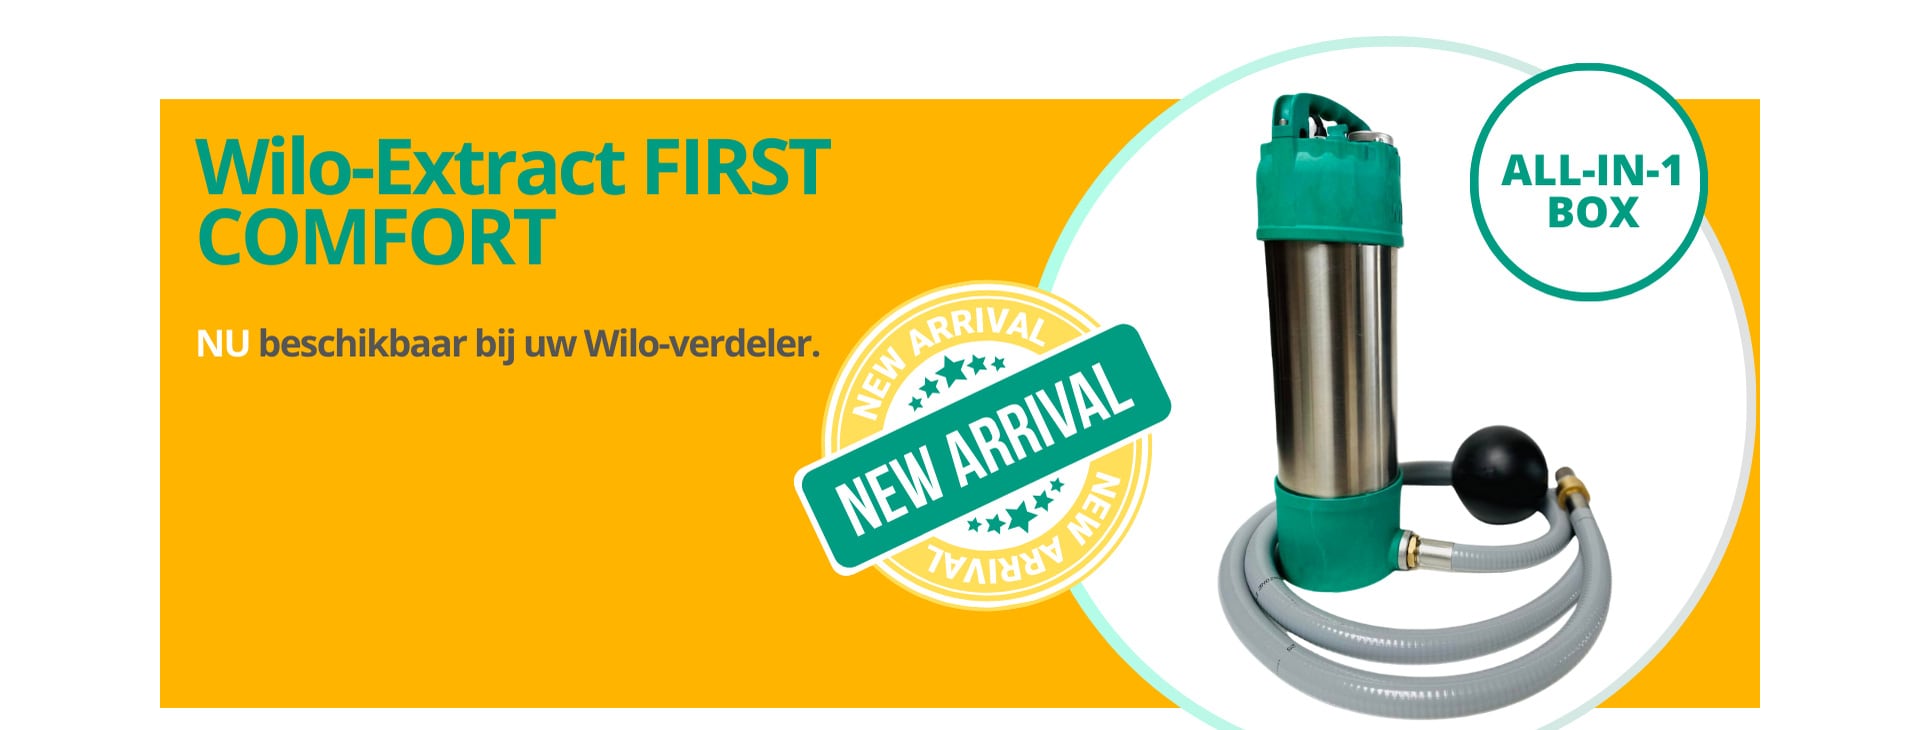 Wilo-Extract FIRST COMFORT